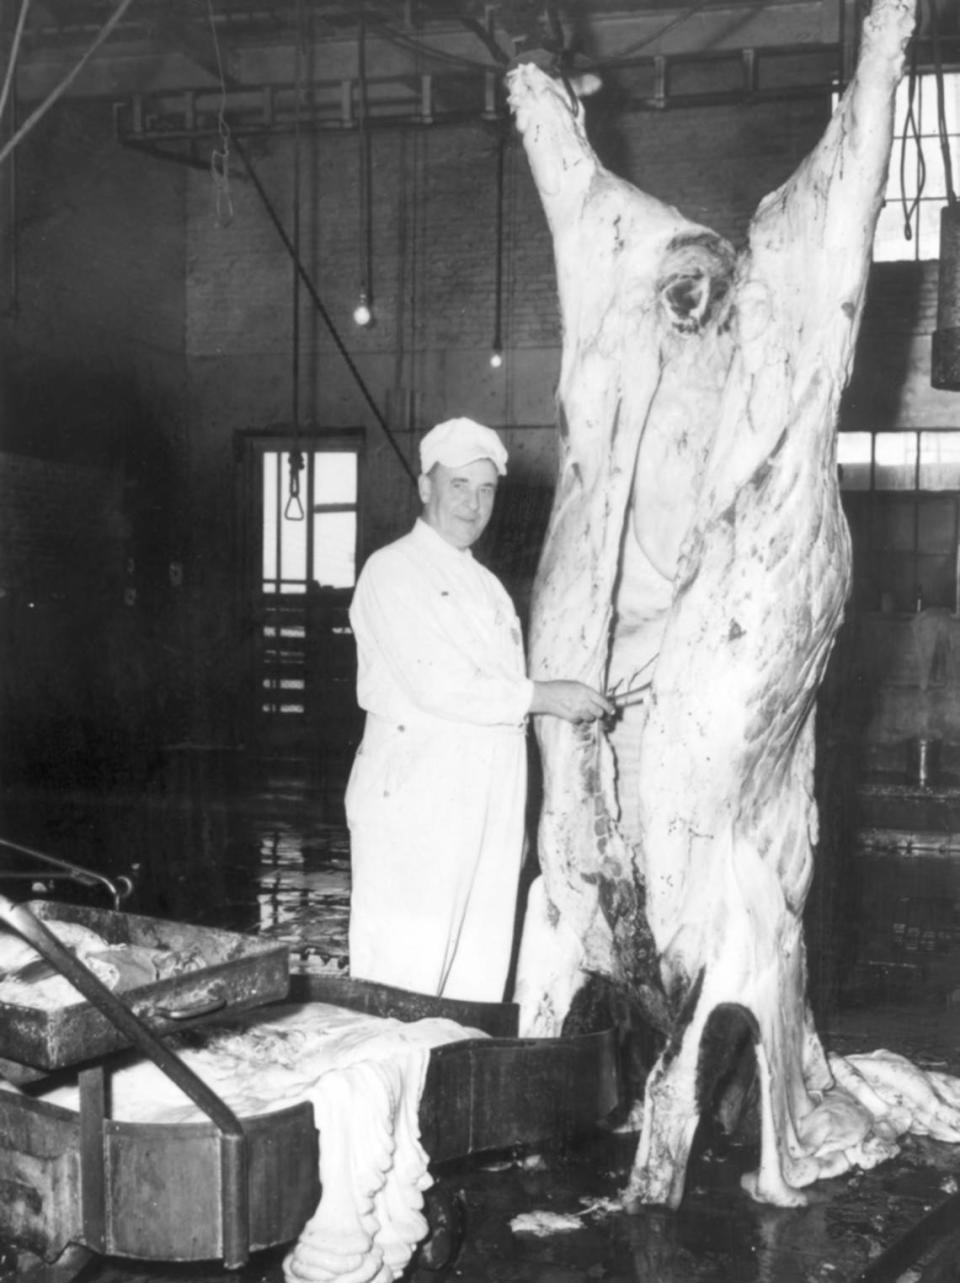 1945: Veteran meat inspector C.W. Woolsey beside beef carcass at Armour & Co. meat packing plant. He was retiring after 45 years.